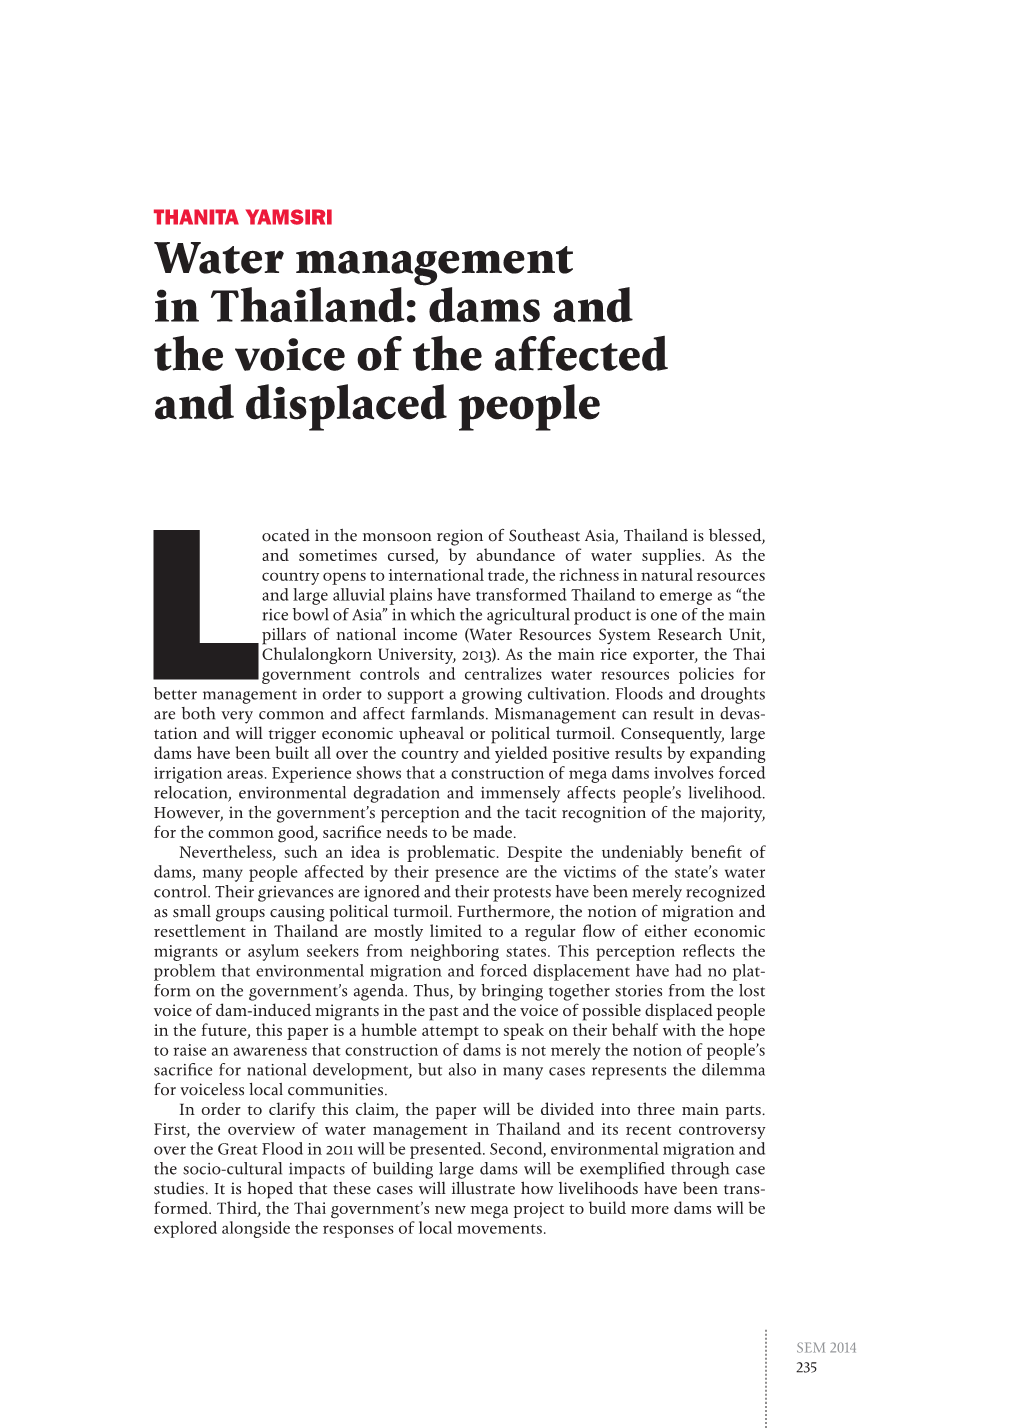 Water Management in Thailand: Dams and the Voice of the Affected and Displaced People